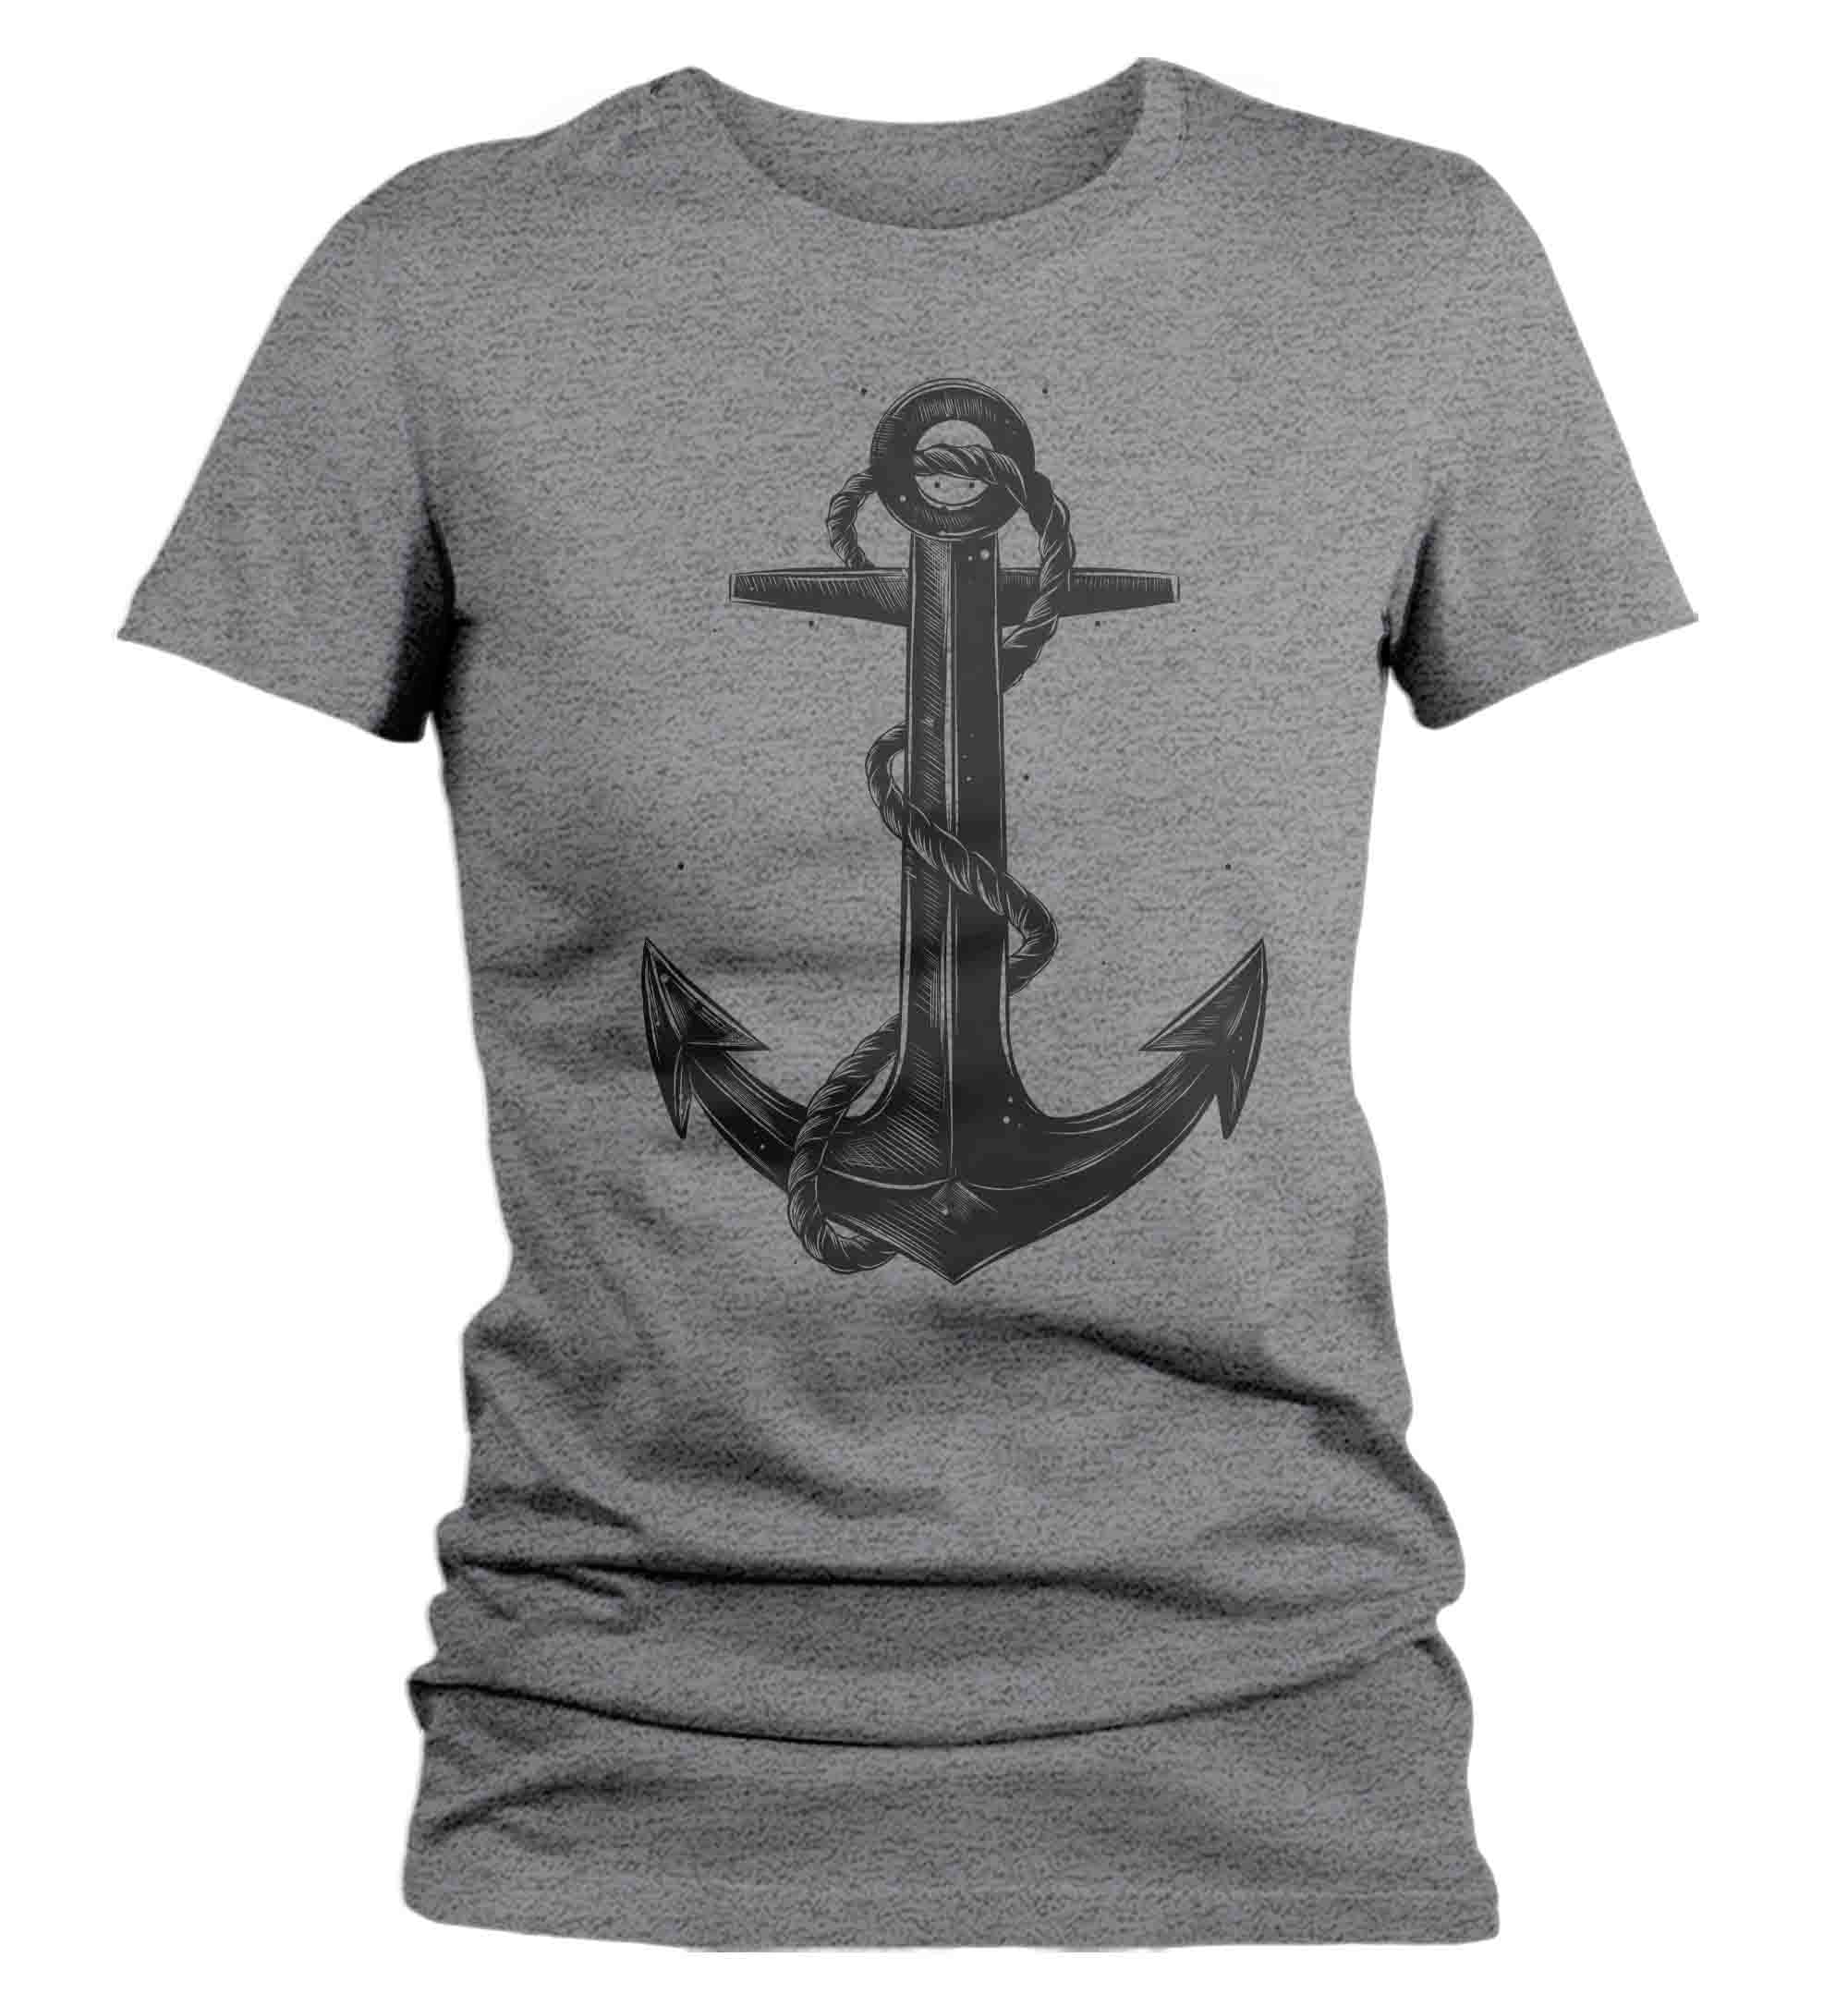 Women's Boating Shirt Vintage Anchor Nautical Boater Sailor 